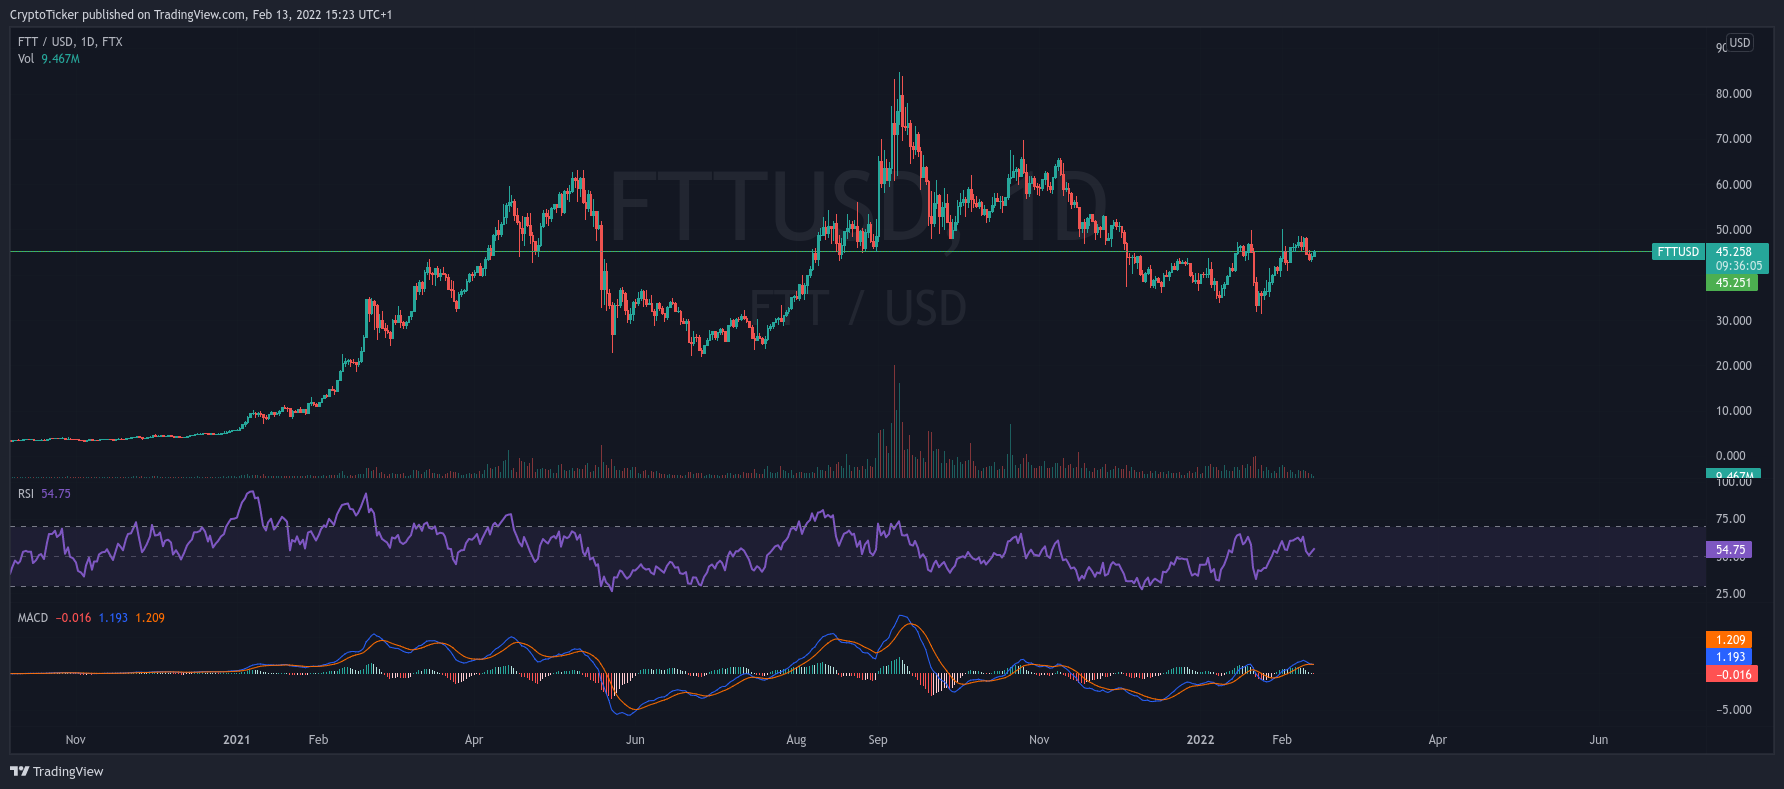 FTT/USD 1-day chart showing FTT trying to break a major resistance